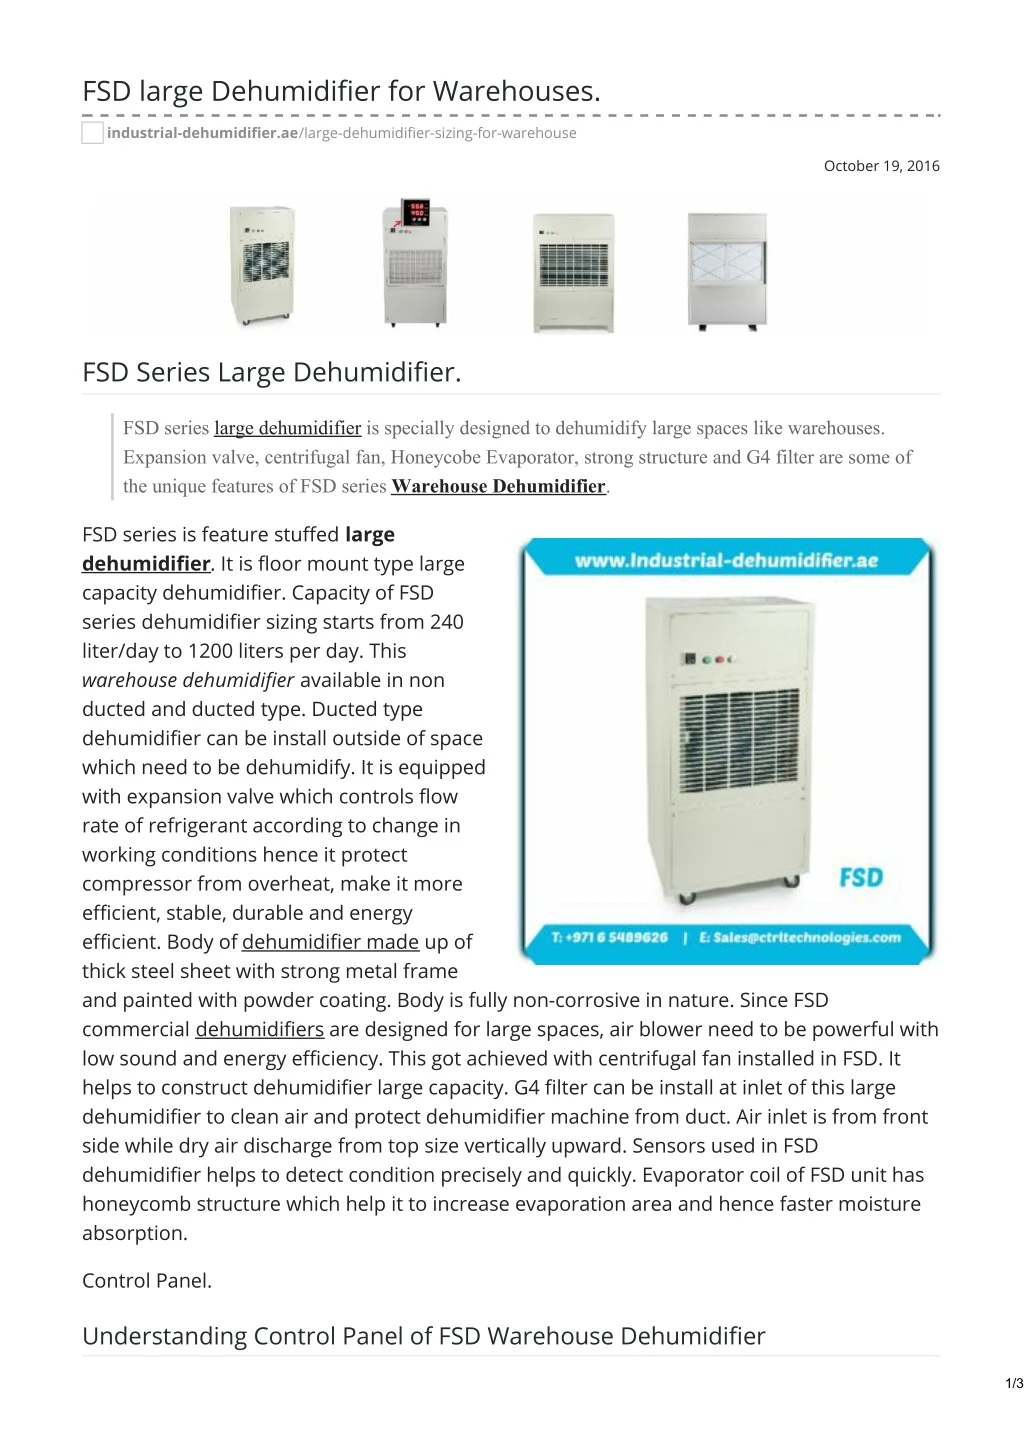 fsd large dehumidifier for warehouses